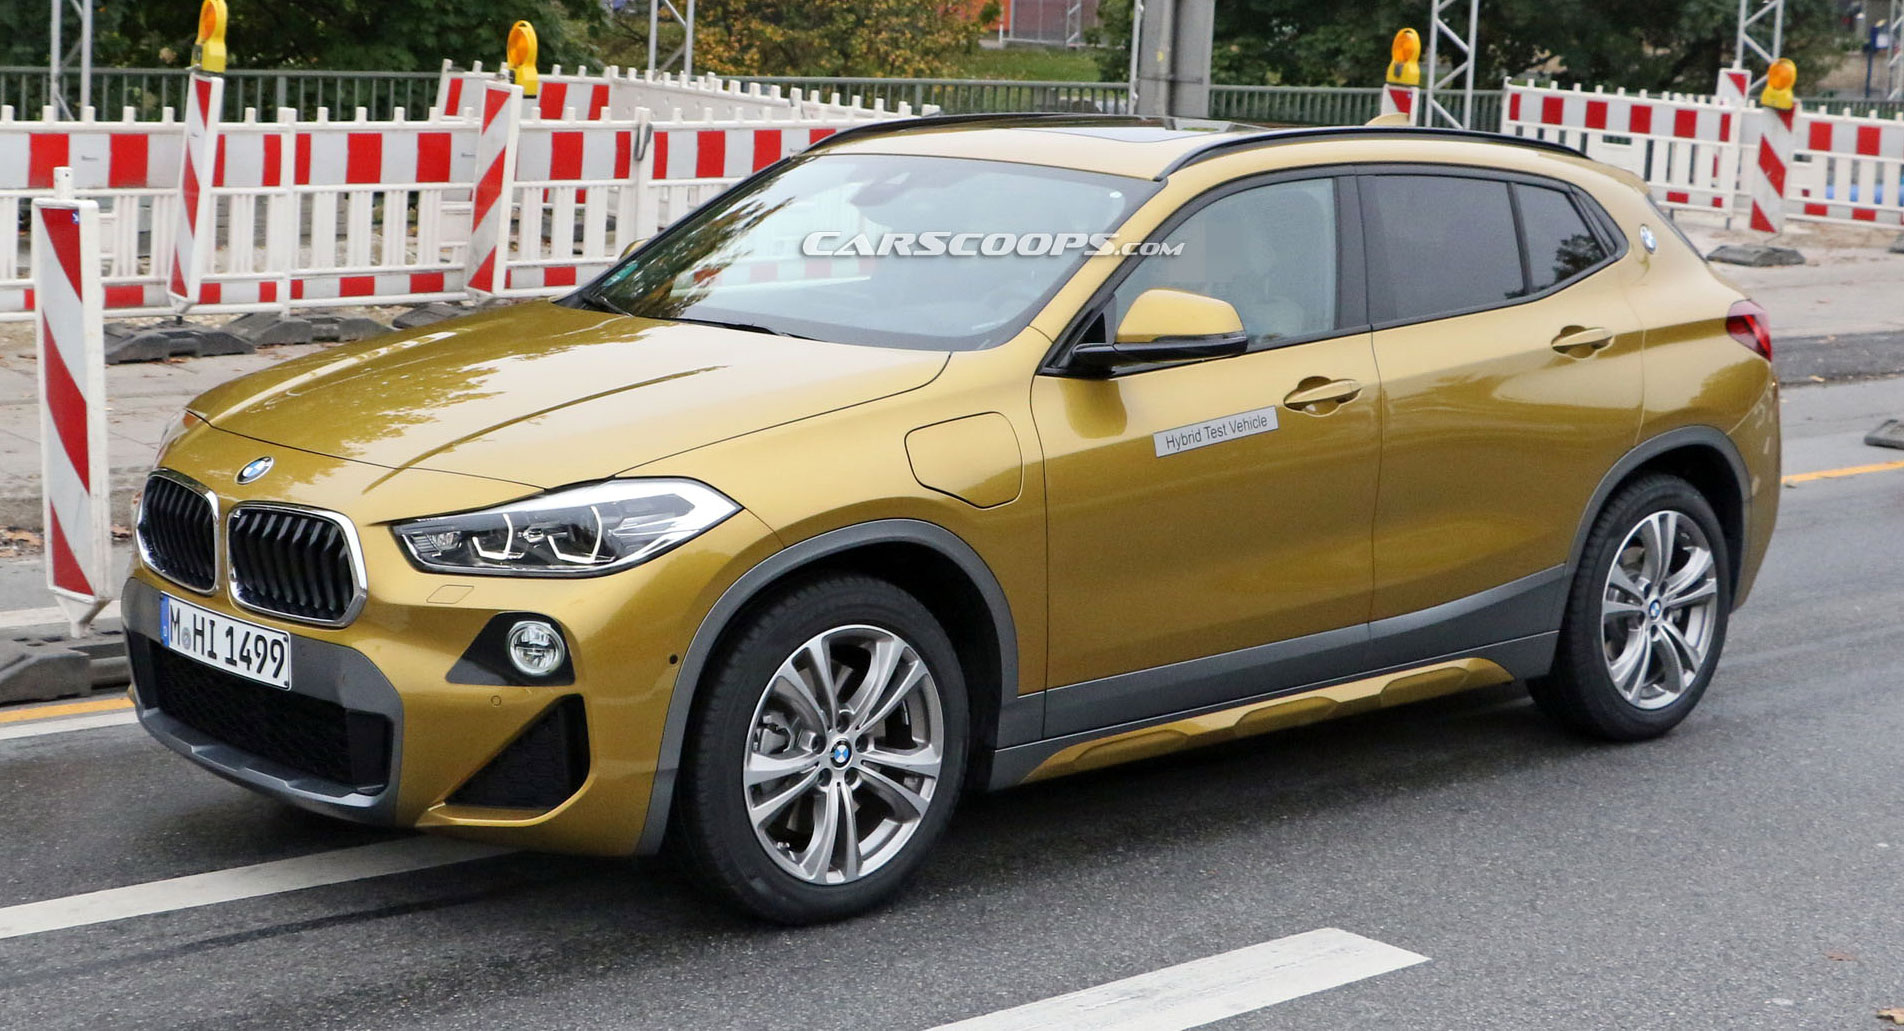 2020 BMW X2 xDrive25e PHEV On The Way With 217 HP And e-AWD